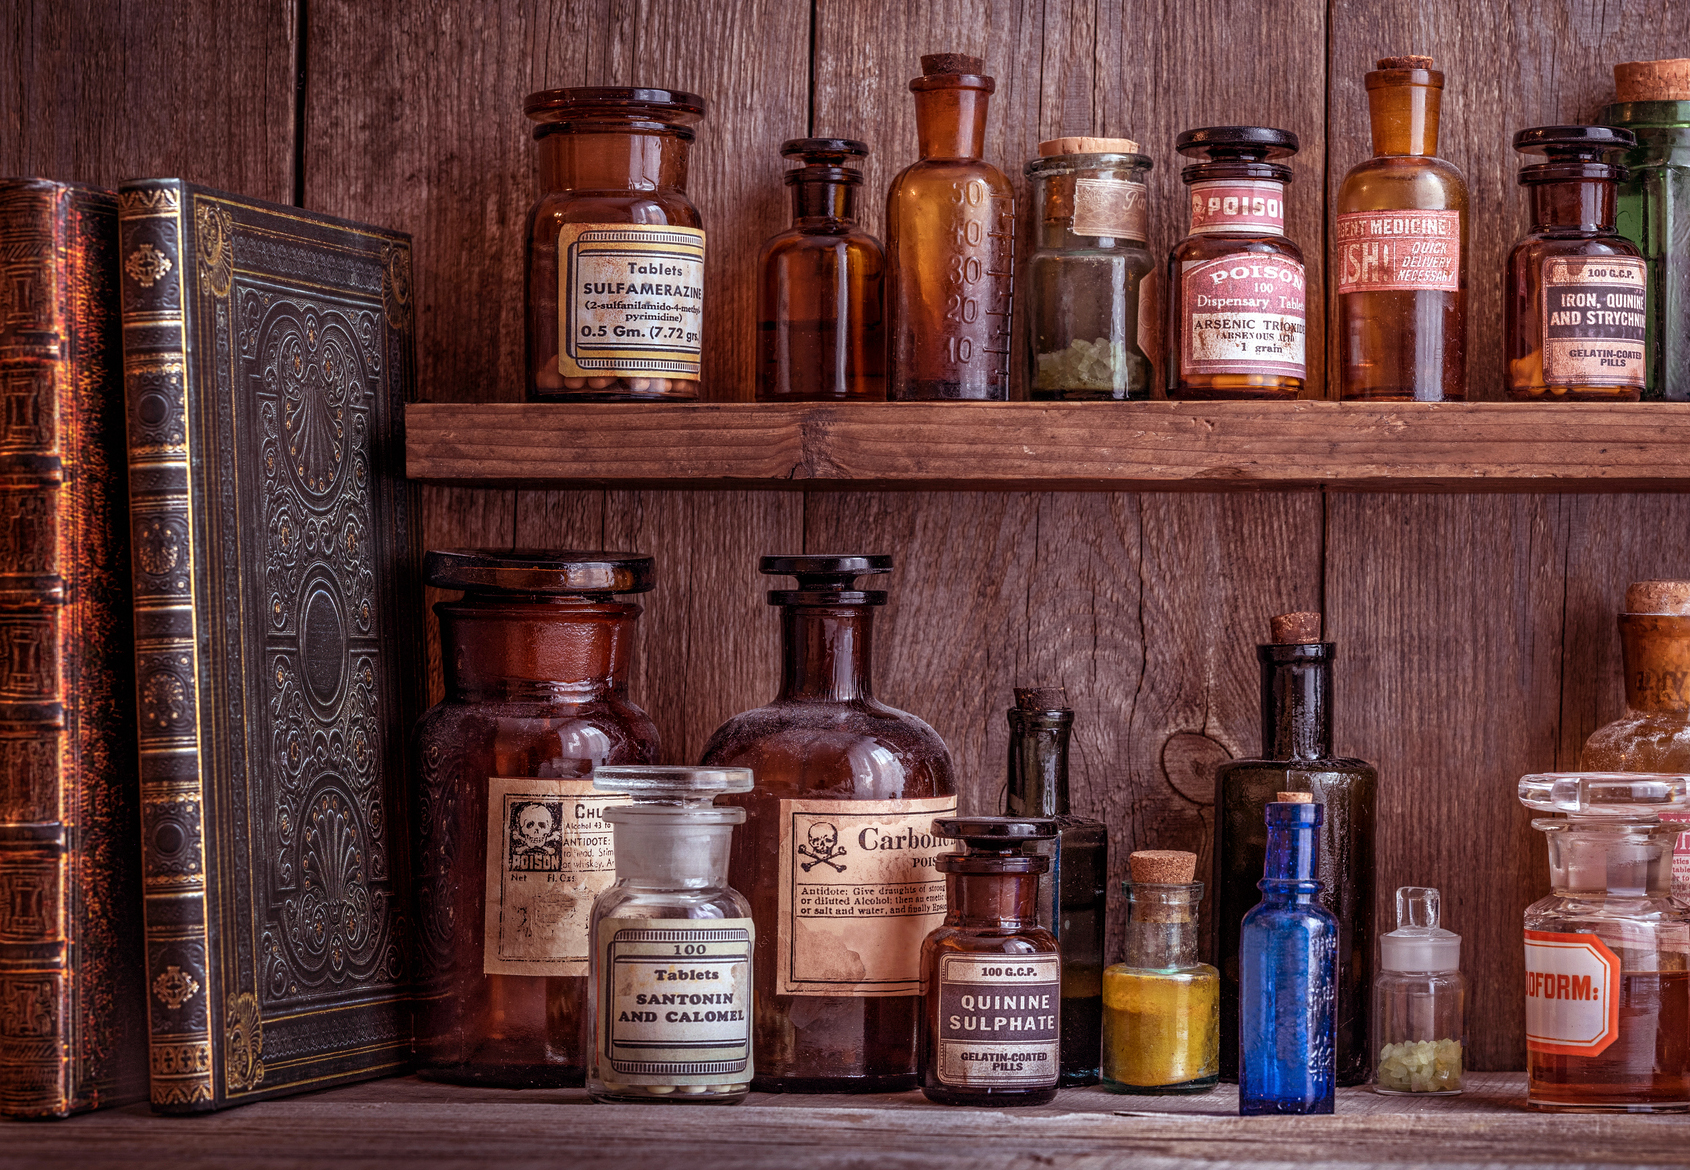 A wooden shelf with antique glass bottles. The bottles contain various medicines, poisons, and chemicals.